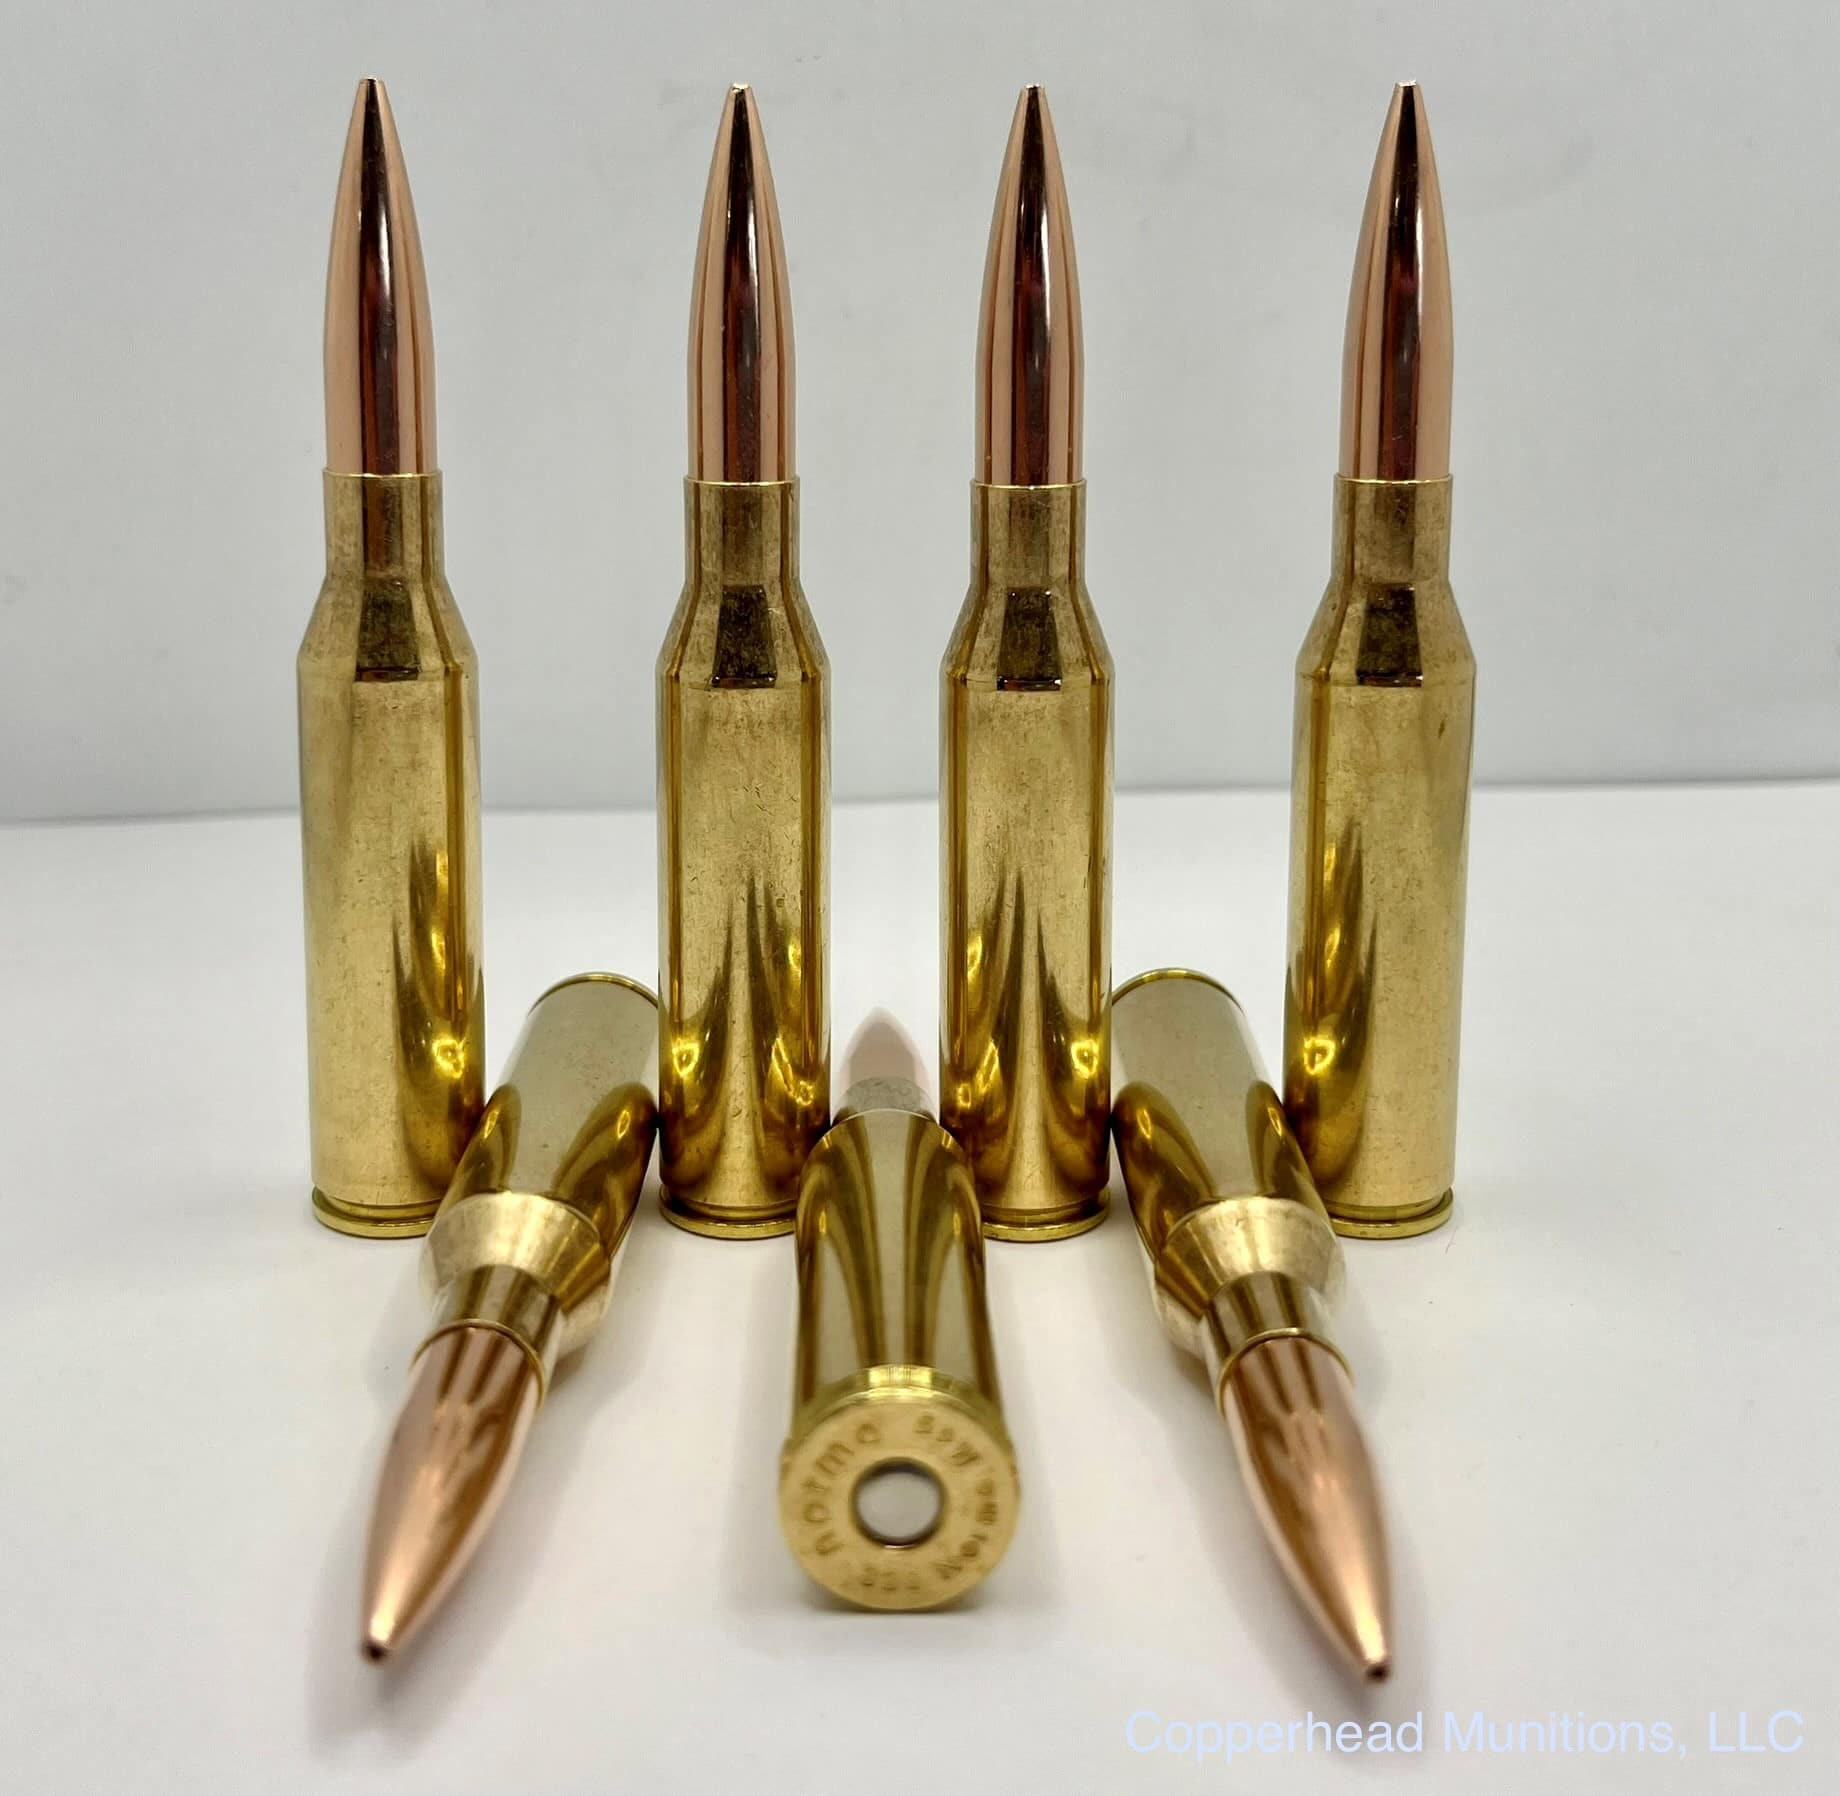 Magnum Sierra Brass Ships Out Quickly HPBT Ammo